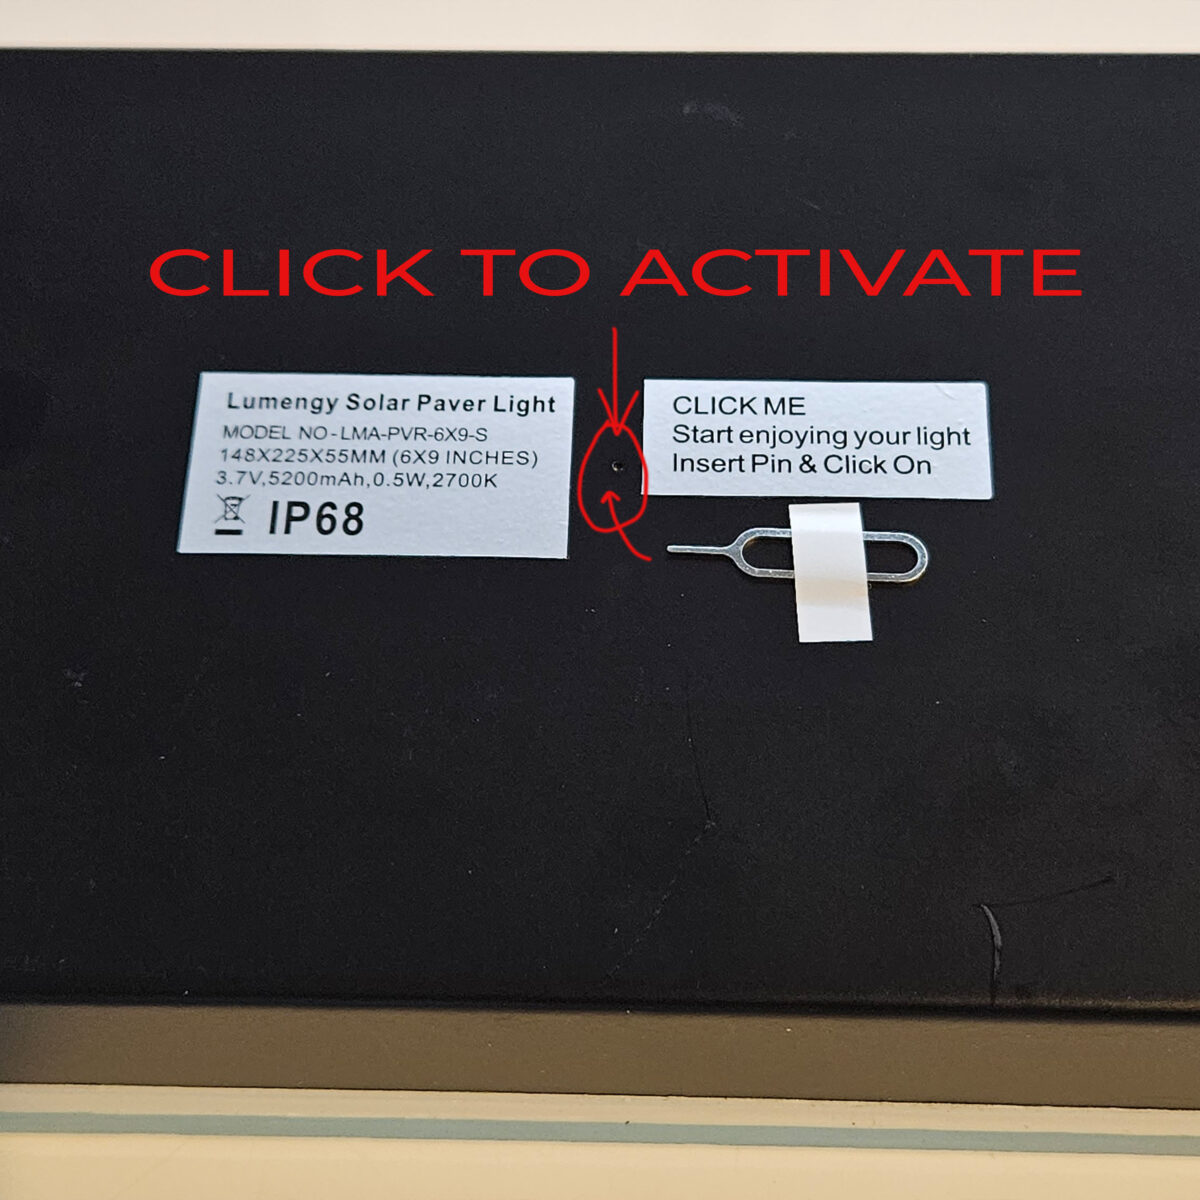 Easy Activation - One Click & You're Lite!